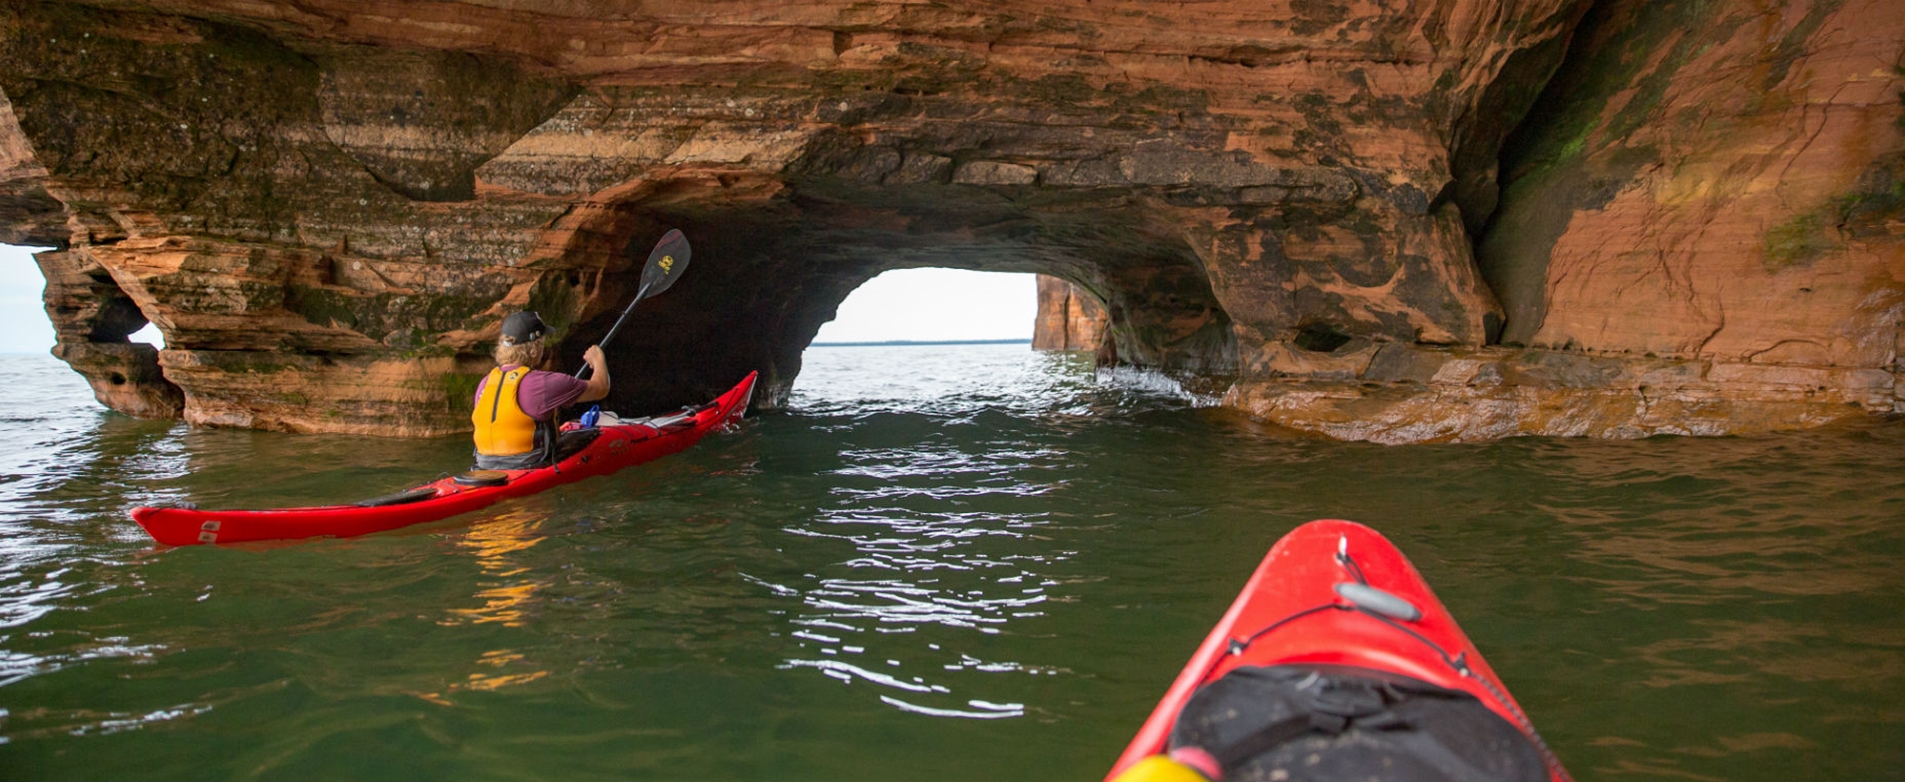 Kayakers Heading into Rock Formation at the Apostle Islands